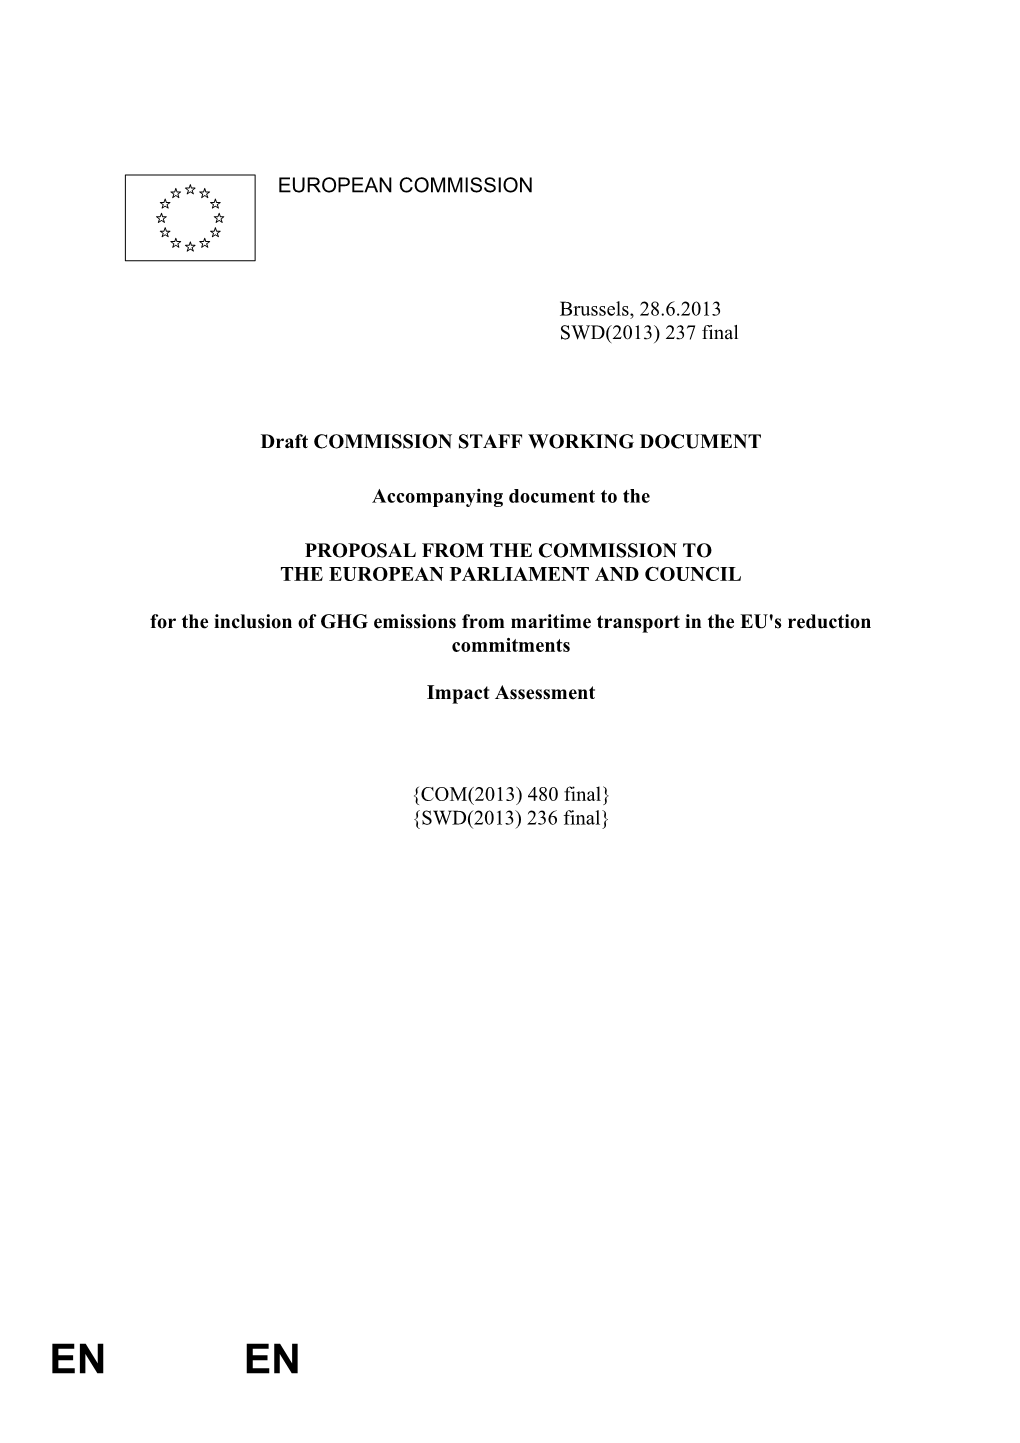 Draft COMMISSION STAFF WORKING DOCUMENT